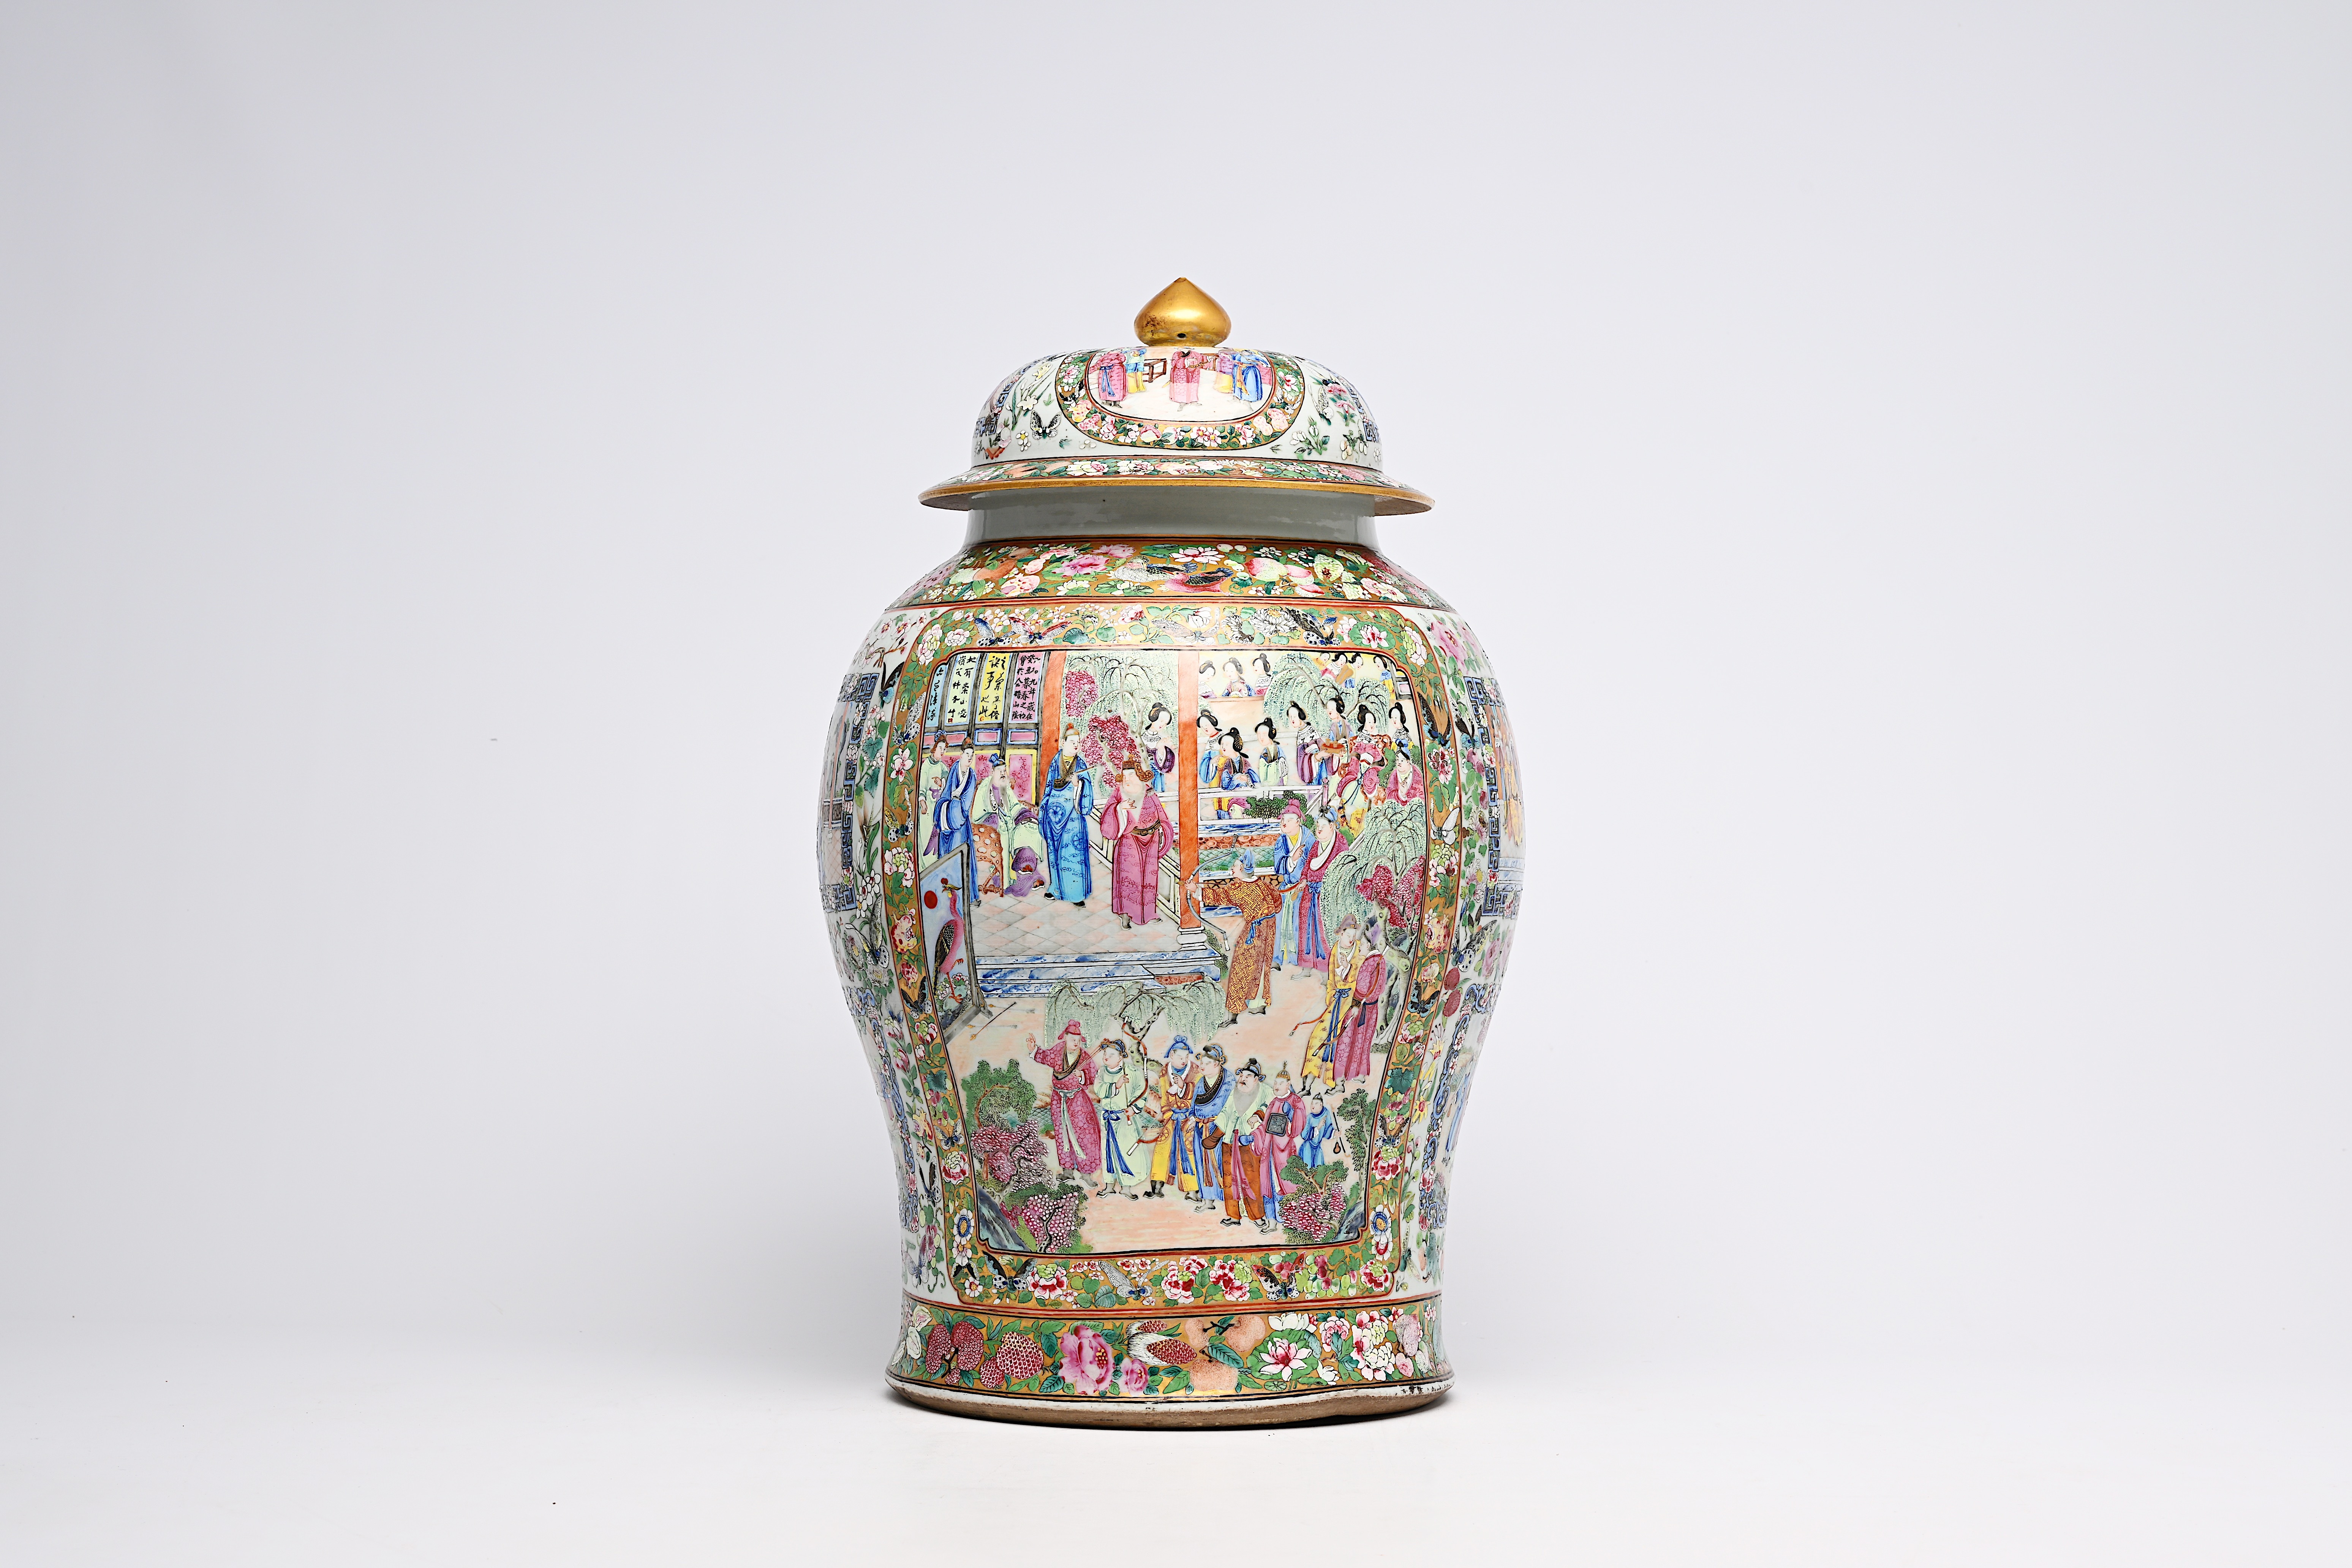 A fine Chinese Canton famille rose vase and cover with palace scenes and floral design, 19th C. - Image 2 of 9